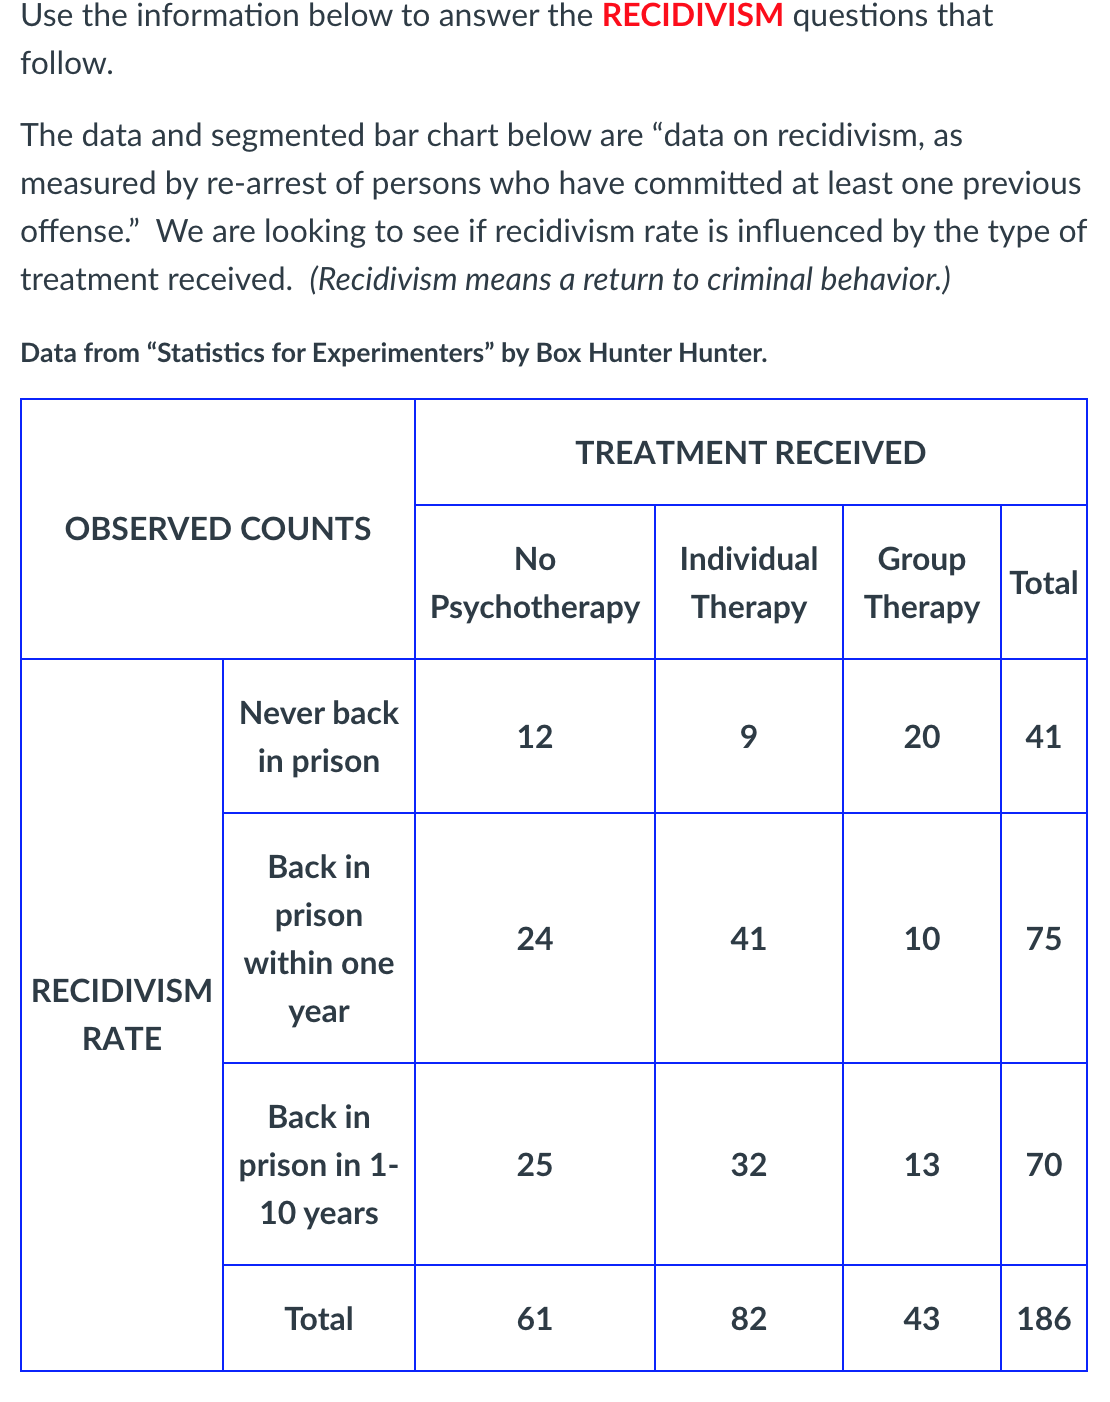 Use the information below to answer the RECIDIVISM questions that
follow.
The data and segmented bar chart below are "data on recidivism, as
measured by re-arrest of persons who have committed at least one previous
offense." We are looking to see if recidivism rate is influenced by the type of
treatment received. (Recidivism means a return to criminal behavior.)
Data from "Statistics for Experimenters" by Box Hunter Hunter.
TREATMENT RECEIVED
OBSERVED COUNTS
No
Individual
Group
Total
Psychotherapy
Therapy
Therapy
Never back
12
20
41
in prison
Back in
prison
41
10
75
within one
RECIDIVISM
year
RATE
Back in
prison in 1-
25
13
70
10 years
Total
61
82
43
186
32
24
